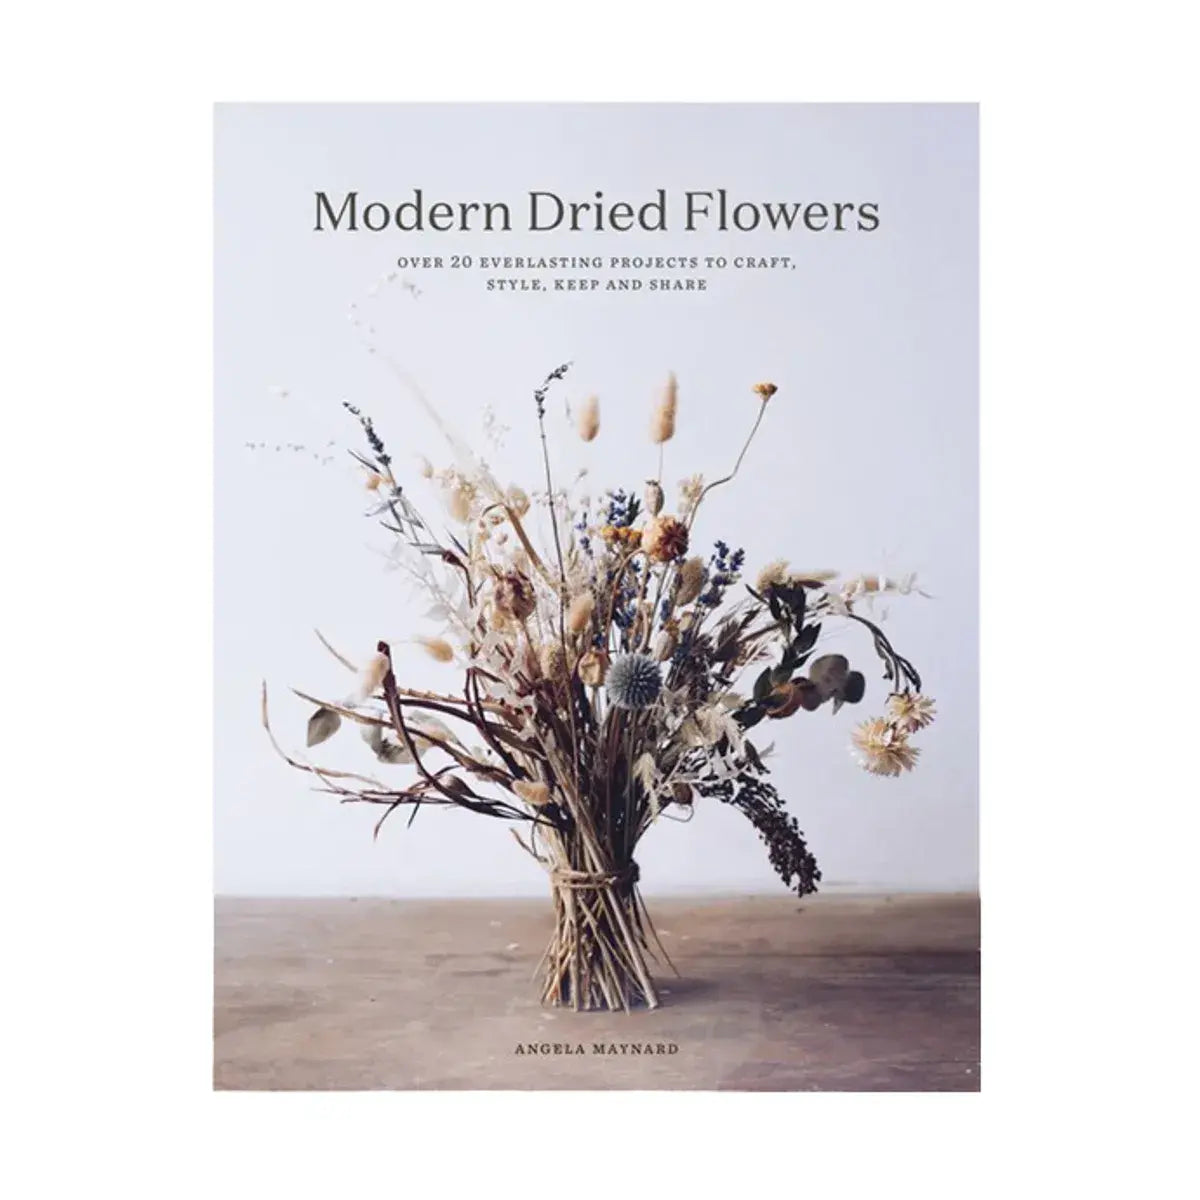 Modern Dried Flowers by Angela Maynard - 20 everlasting projects to craft, style, keep and share 